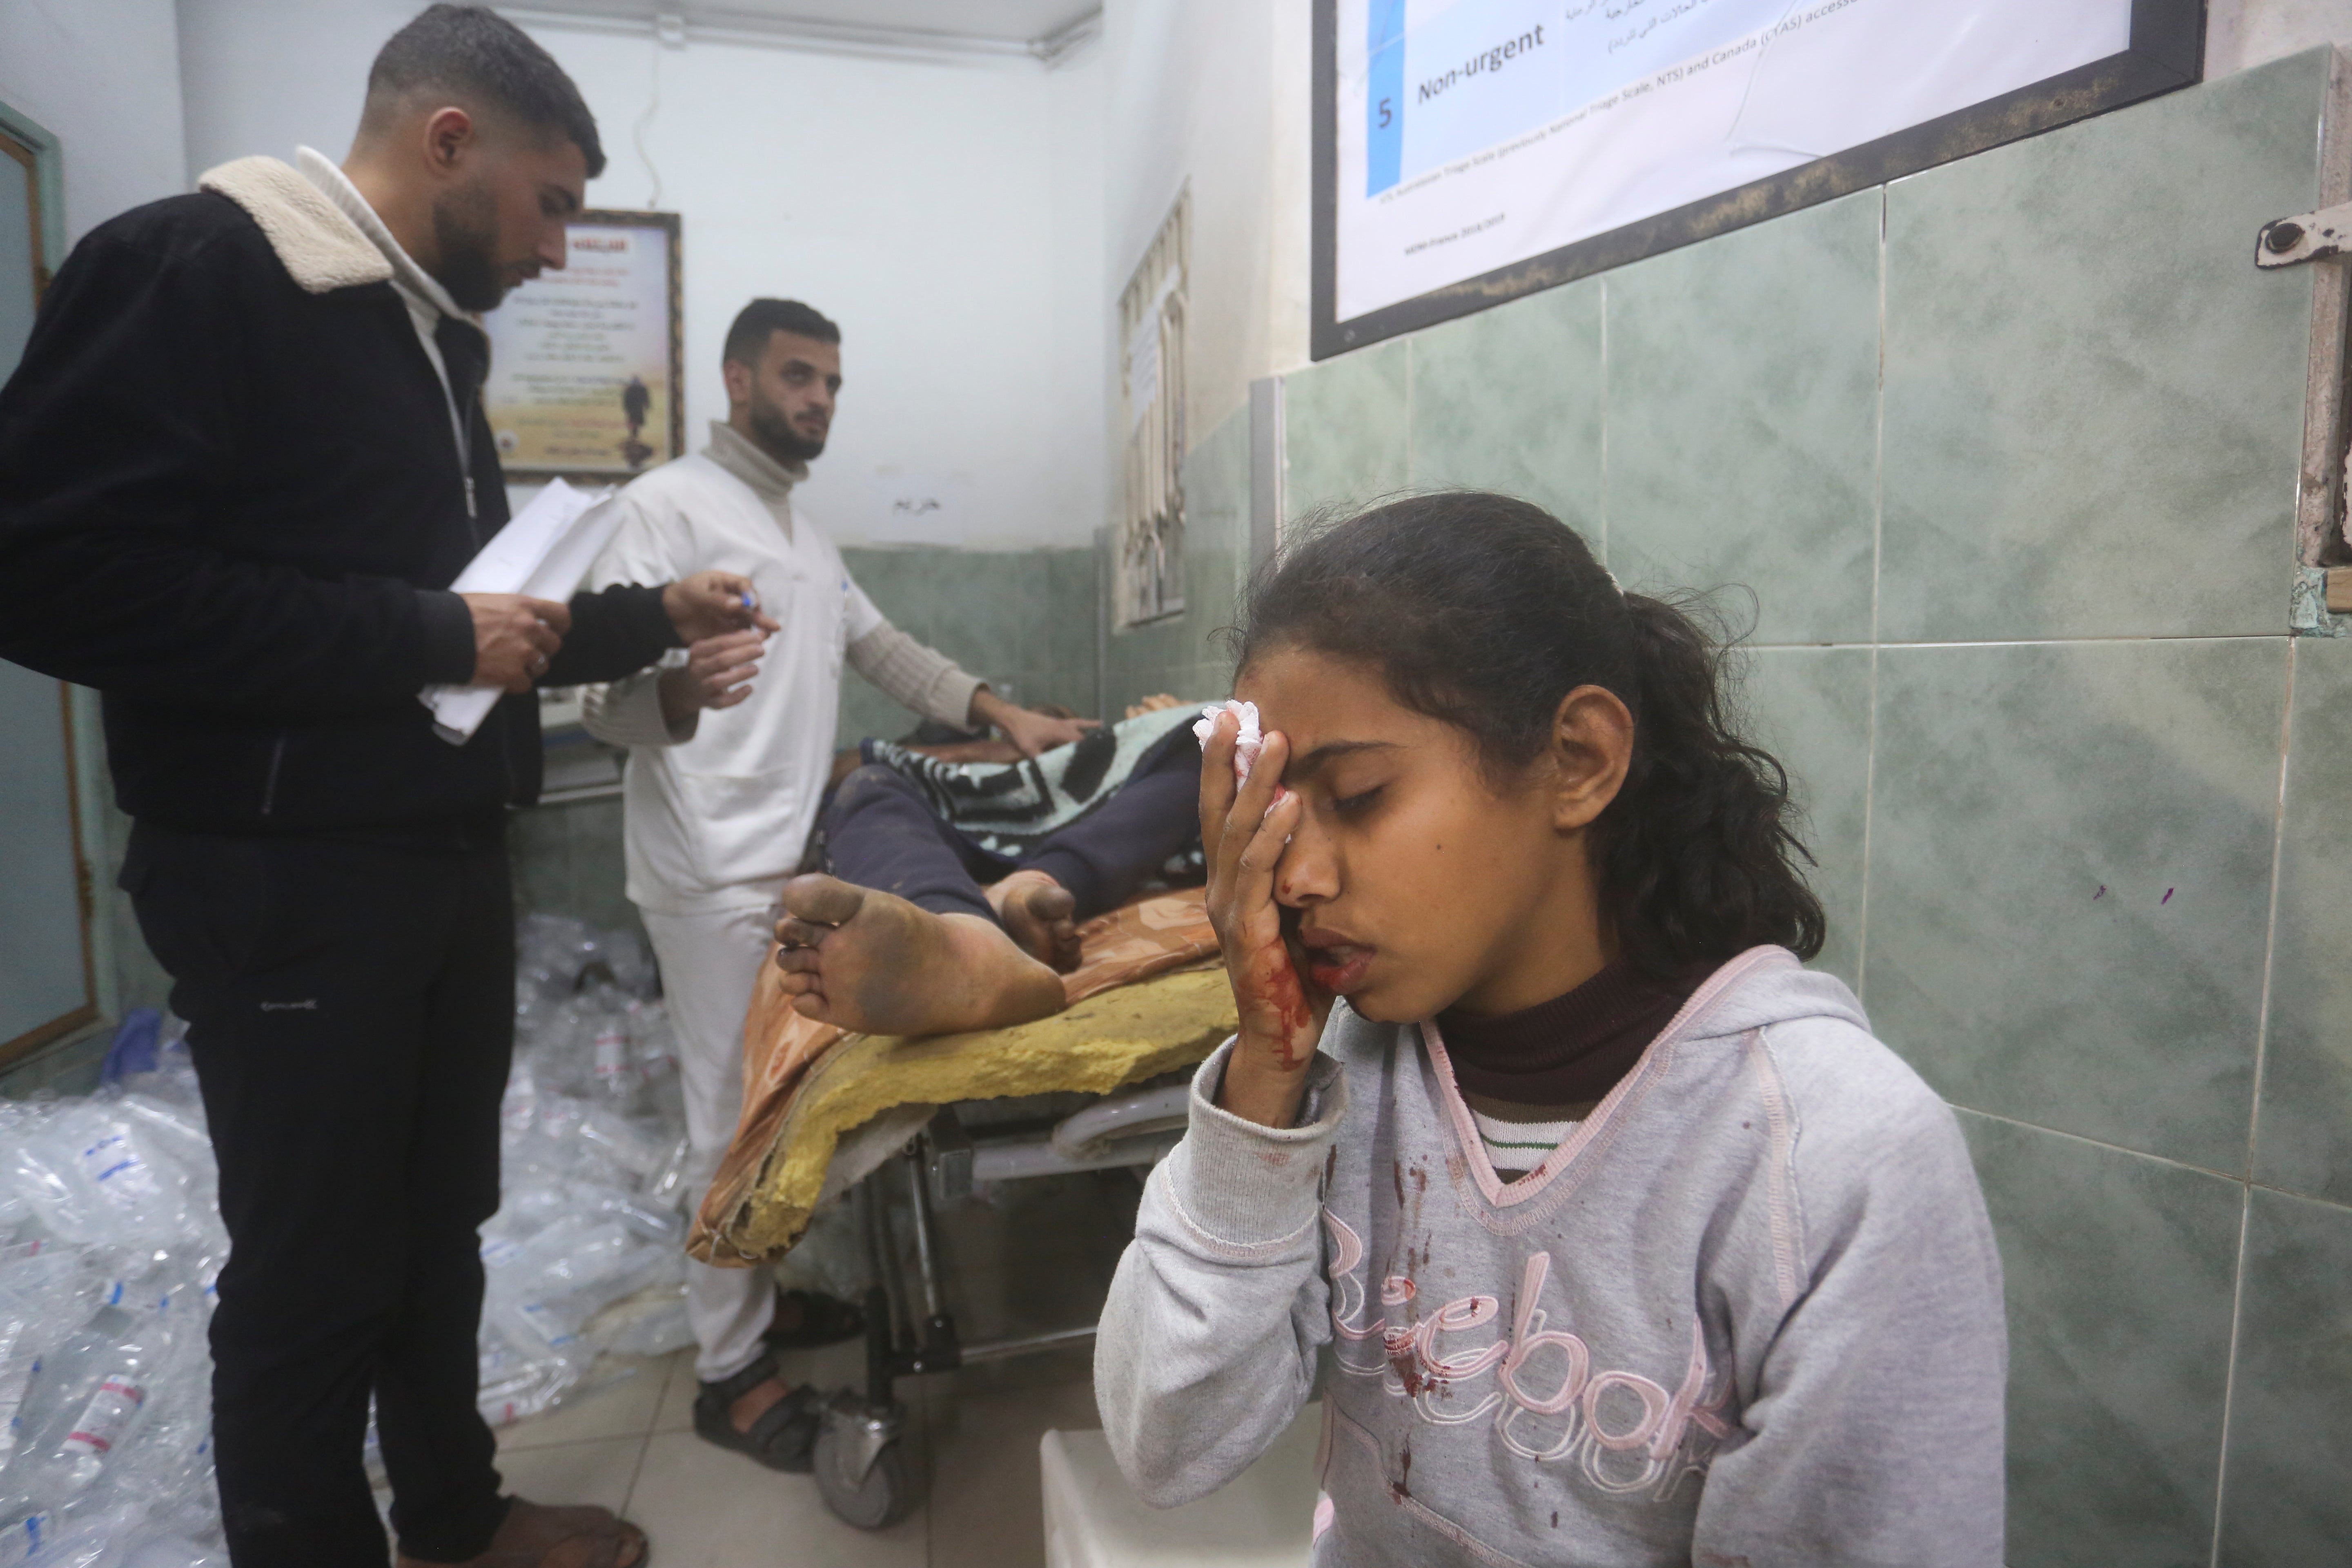 Palestinians wounded in the Israeli bombardment receive treatment in a hospital in Rafah, southern Gaza